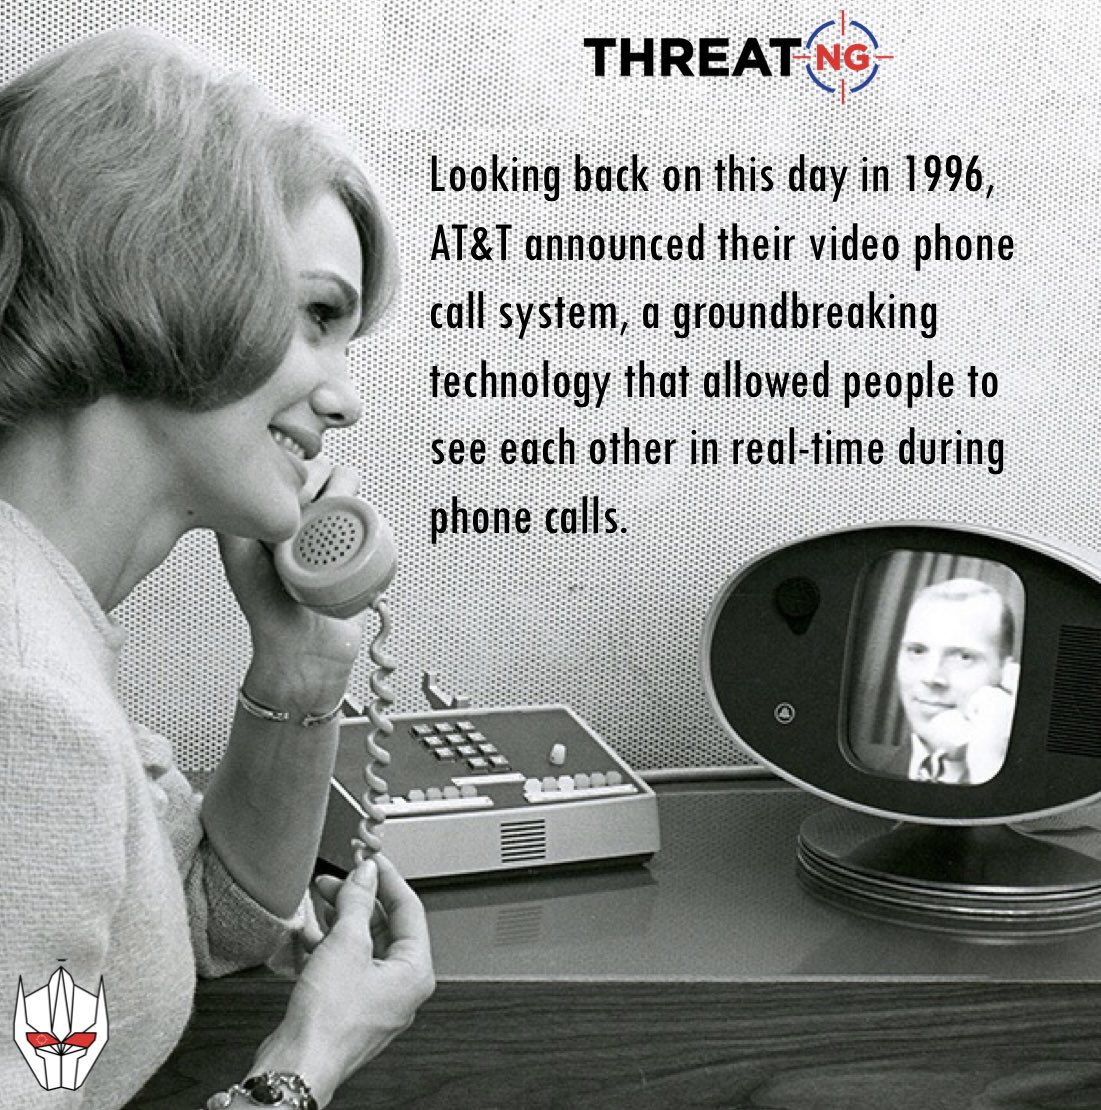 Looking back on this day in 1996, AT&T announced their video phone call system, a groundbreaking technology that allowed people to see each other in real-time during phone calls. 
#ASM #AttackSurface #AttackSurfaceManagement